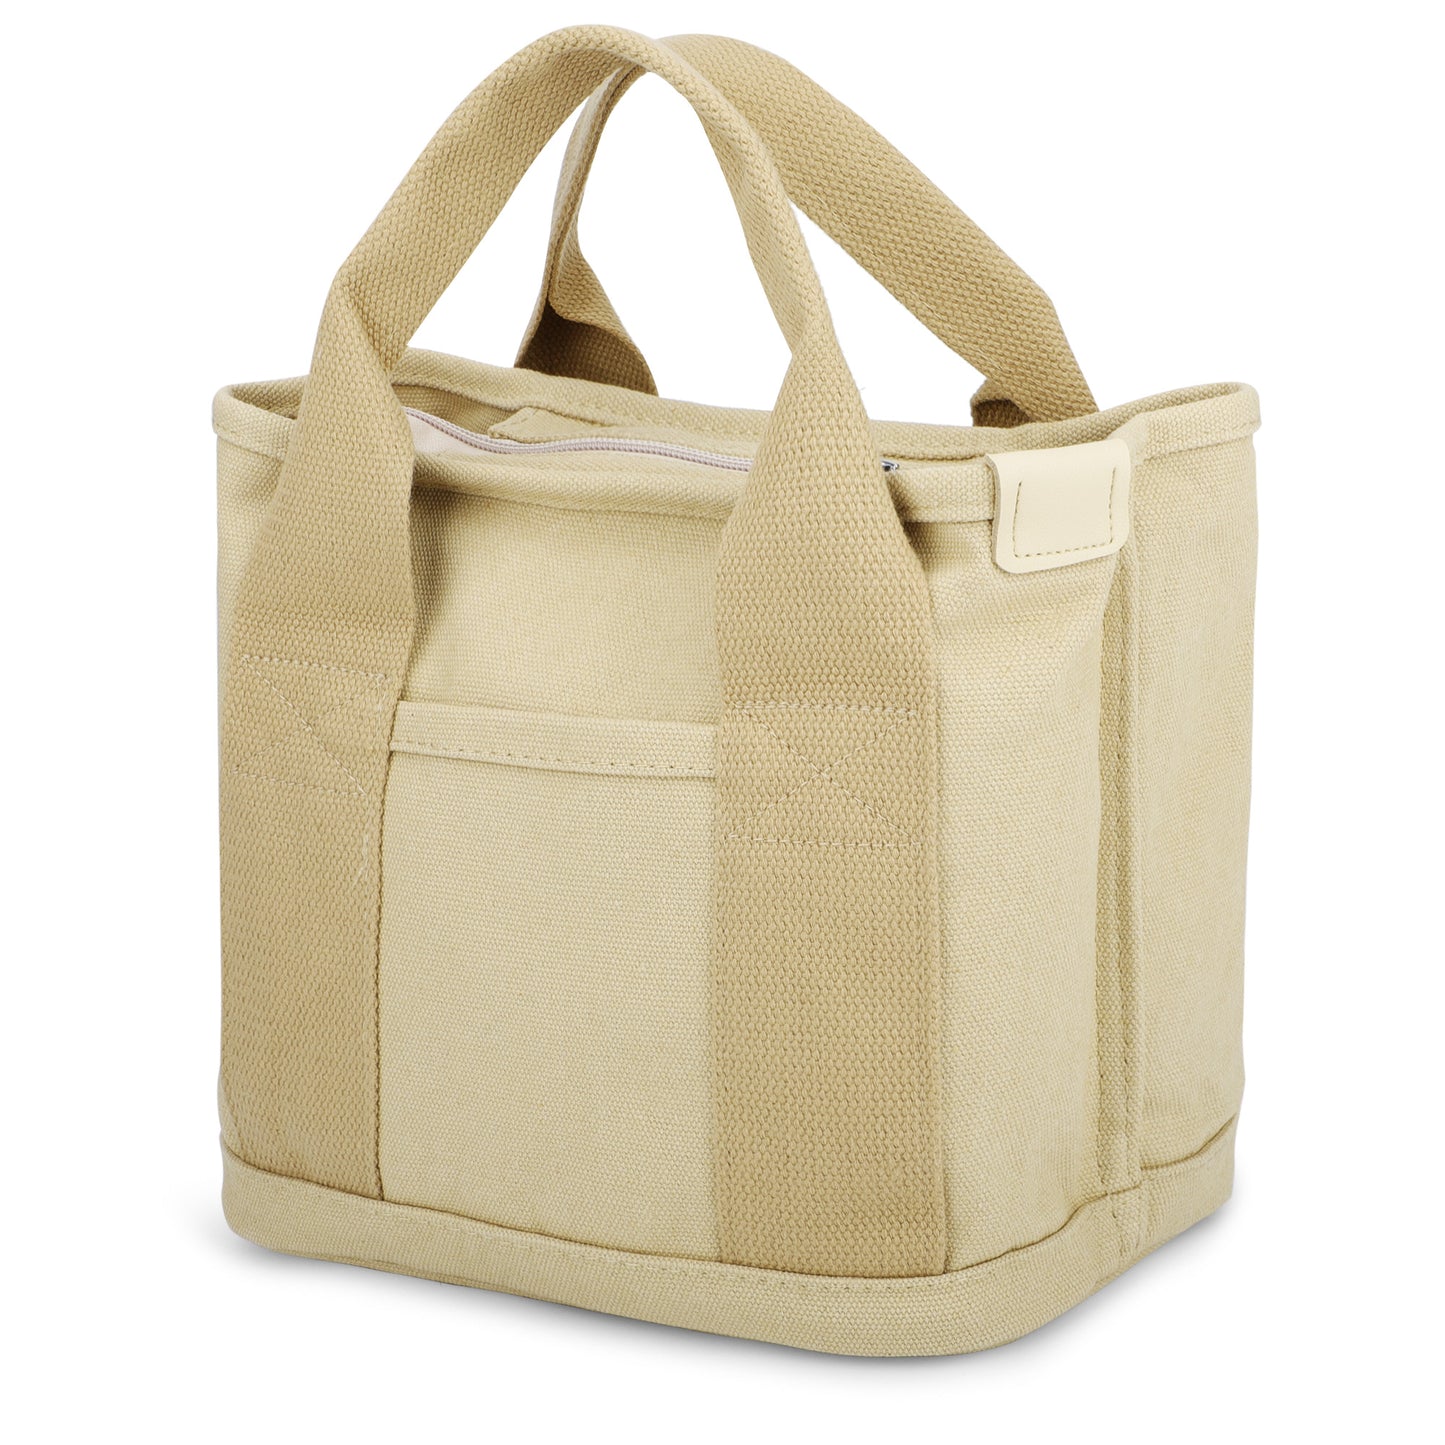 Small Canvas Tote Bag,  Stylish Handbag with Zipper and Top Handle, Satchel Purse for Women, Khaki